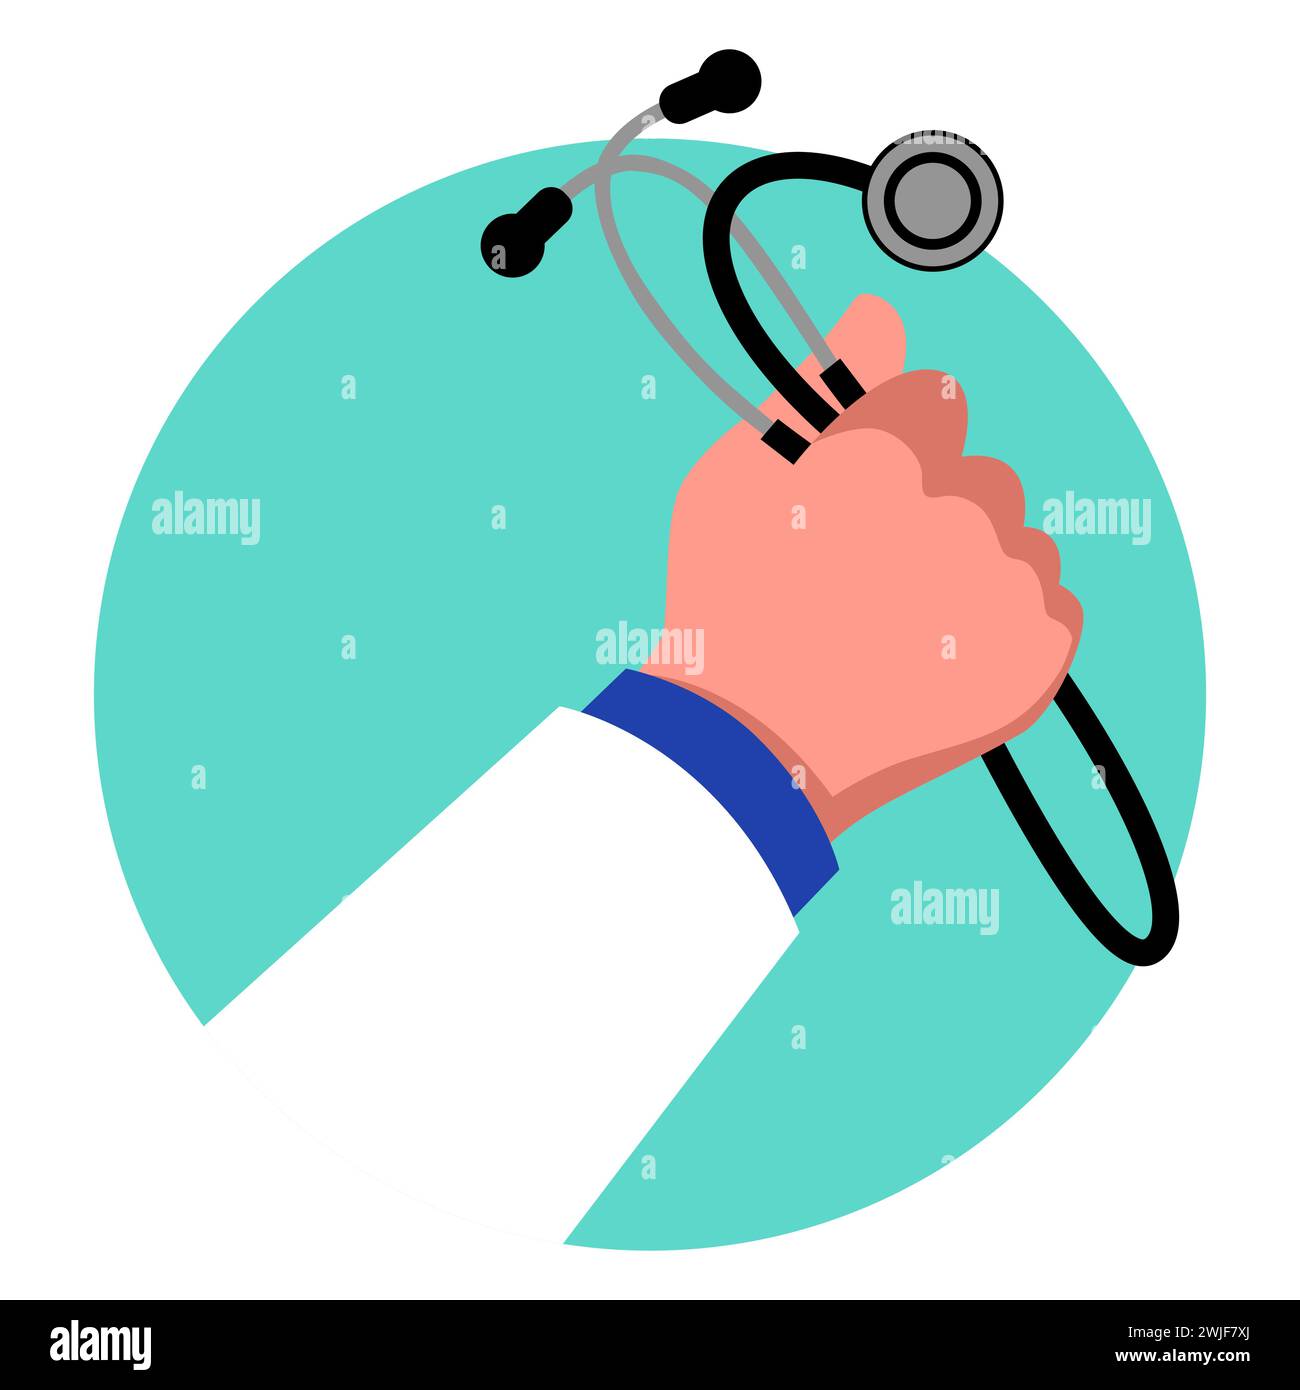 Clip art of a doctor hand holding a stethoscope, vector illustration Stock Vector